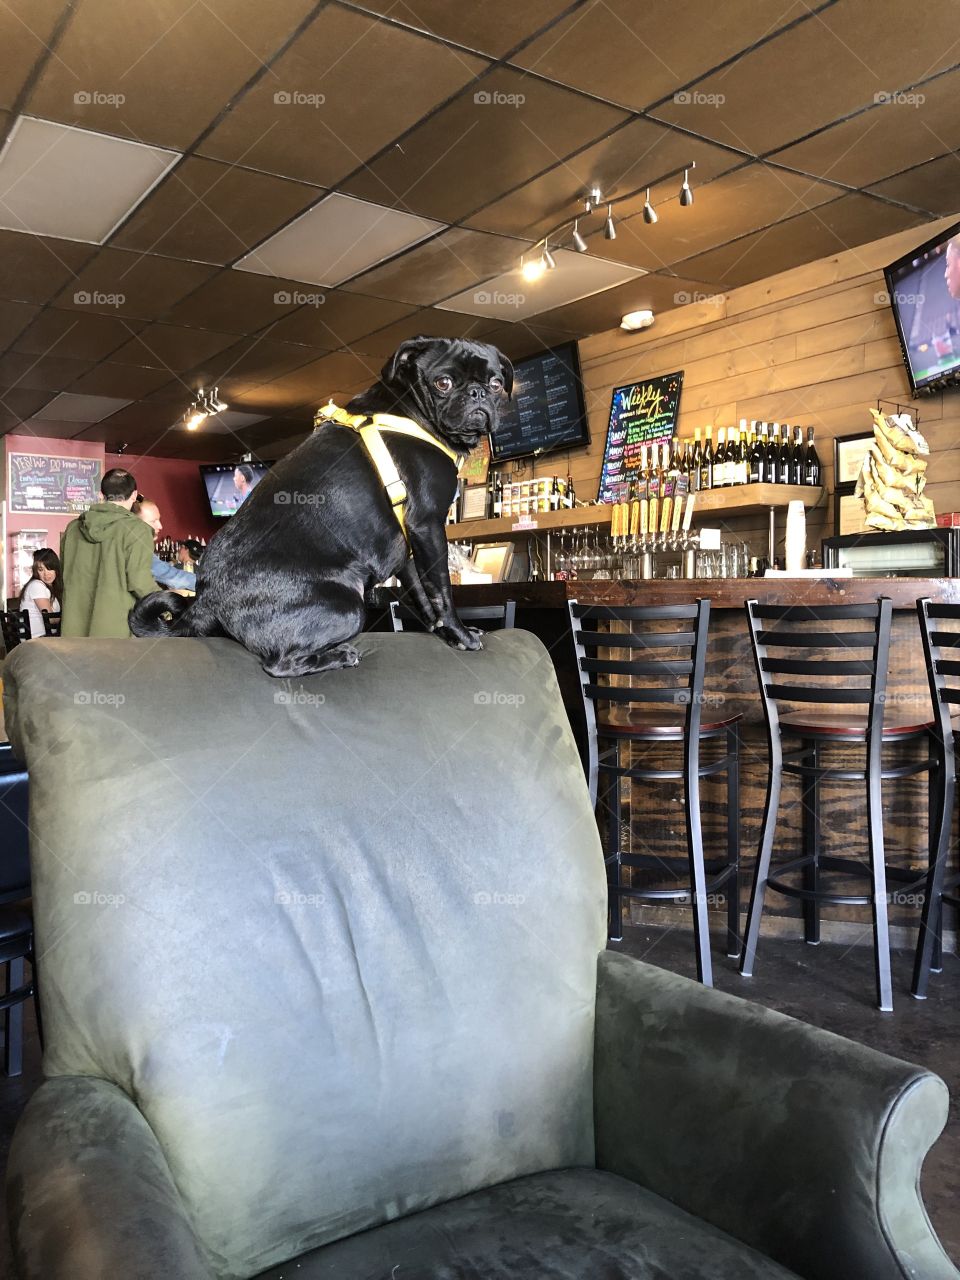 Dog on a chair